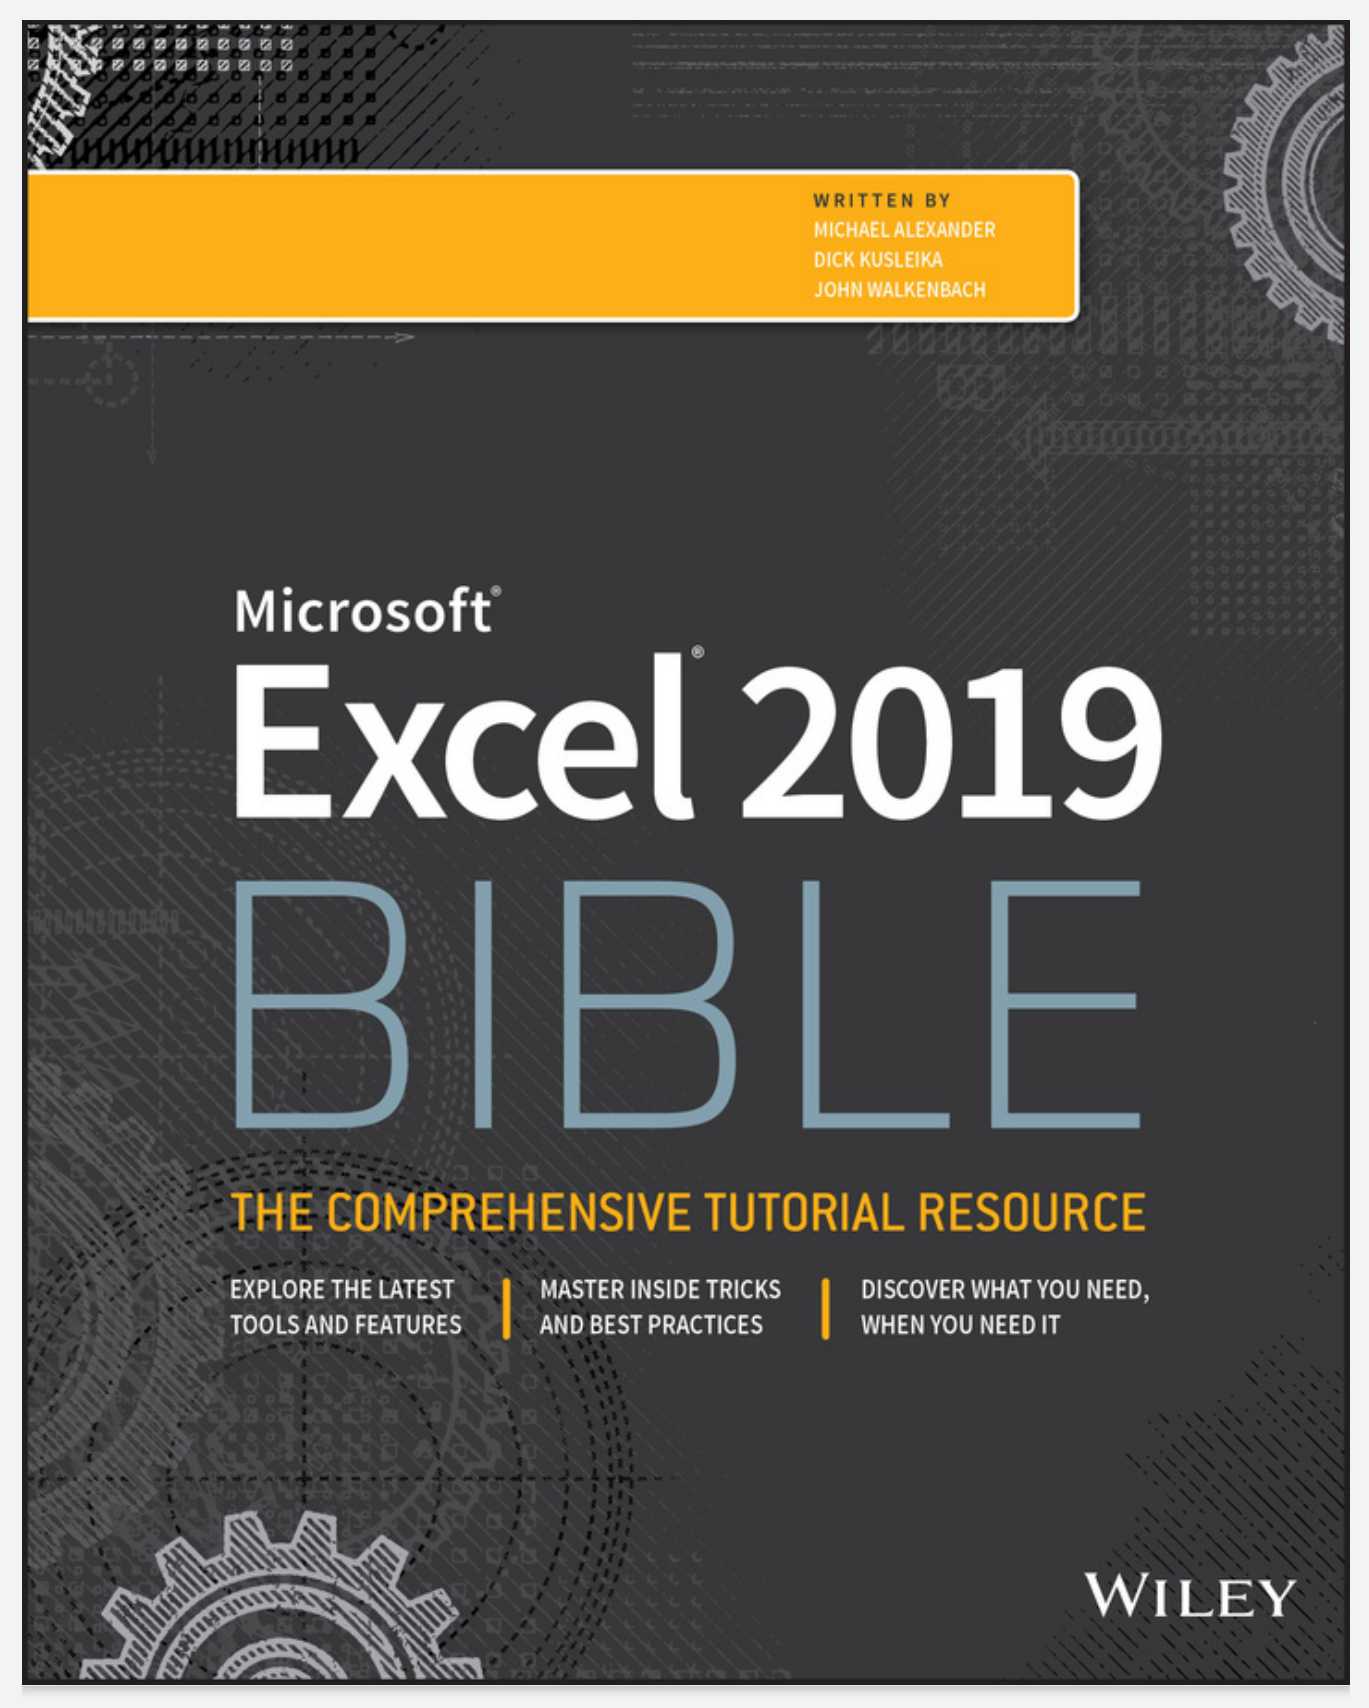 Microsoft Excel 2019 Bible: The Comprehensive Tutorial Resource Free PDF Download